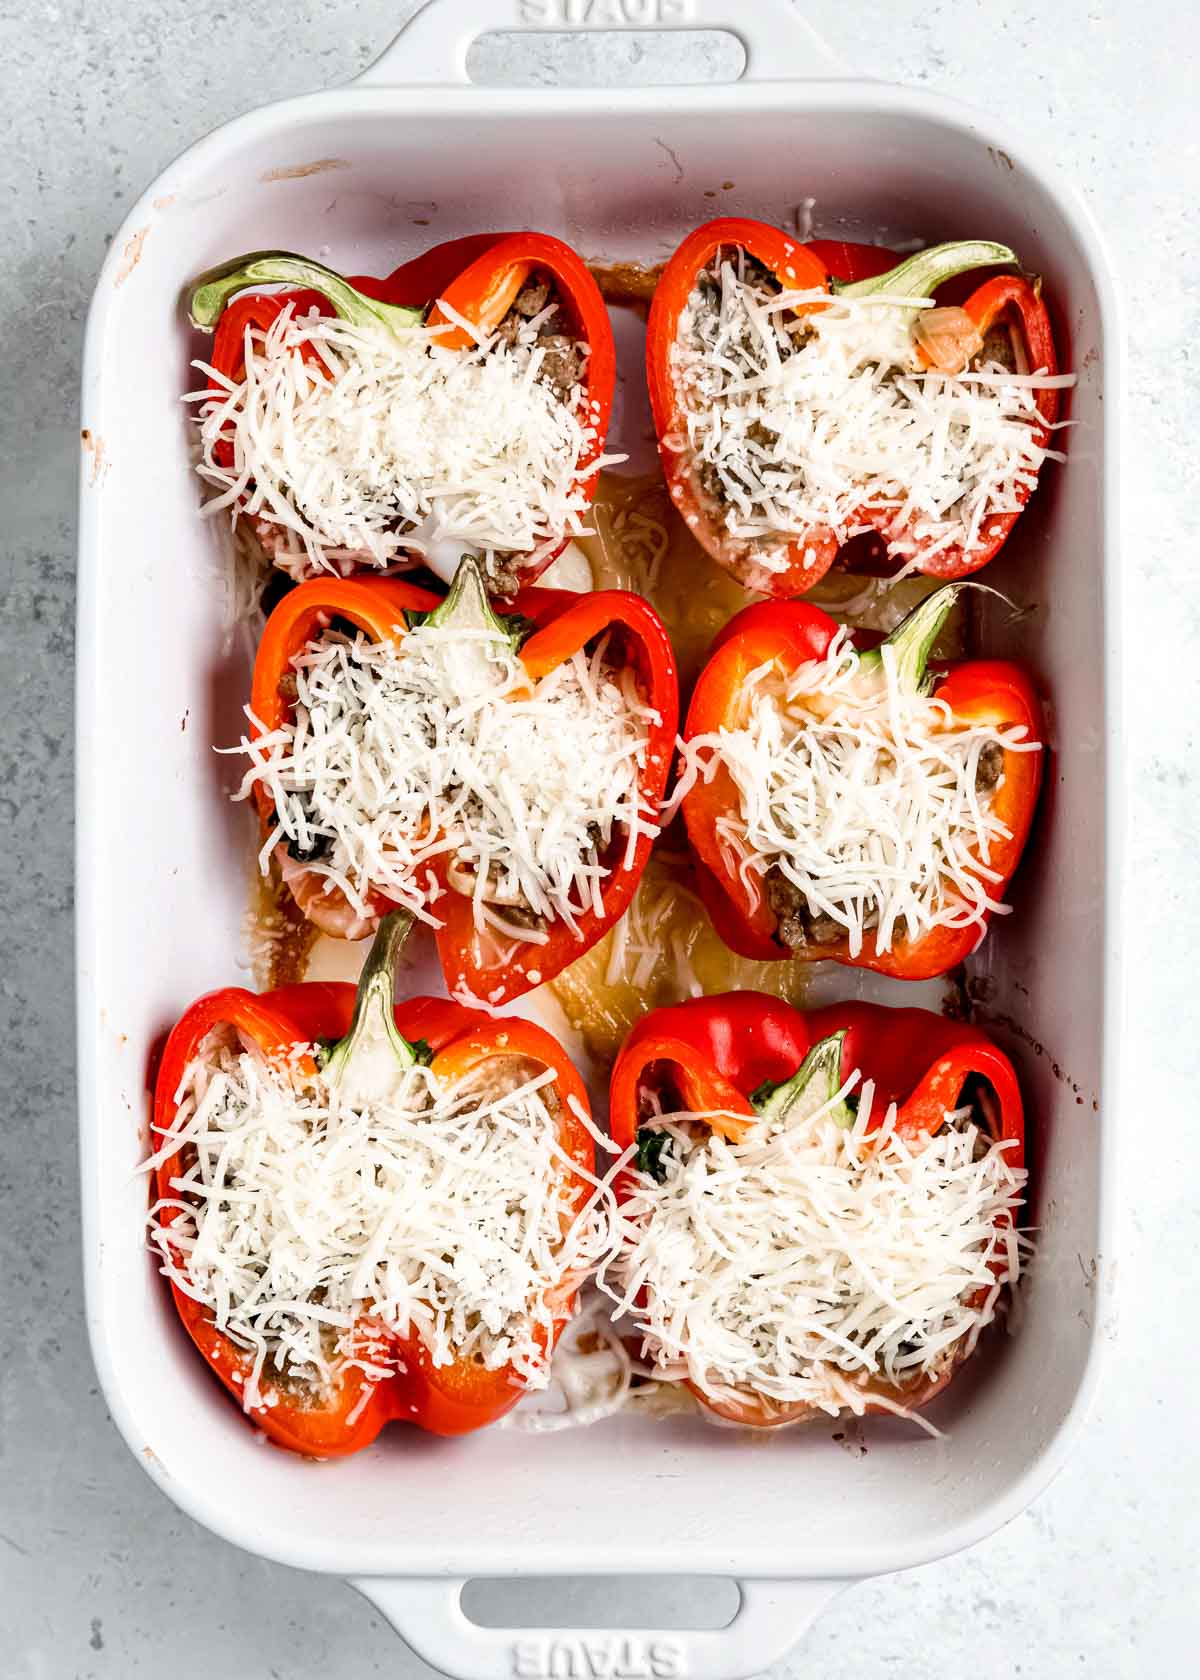 cheese being added to stuffed bell peppers in baking dish